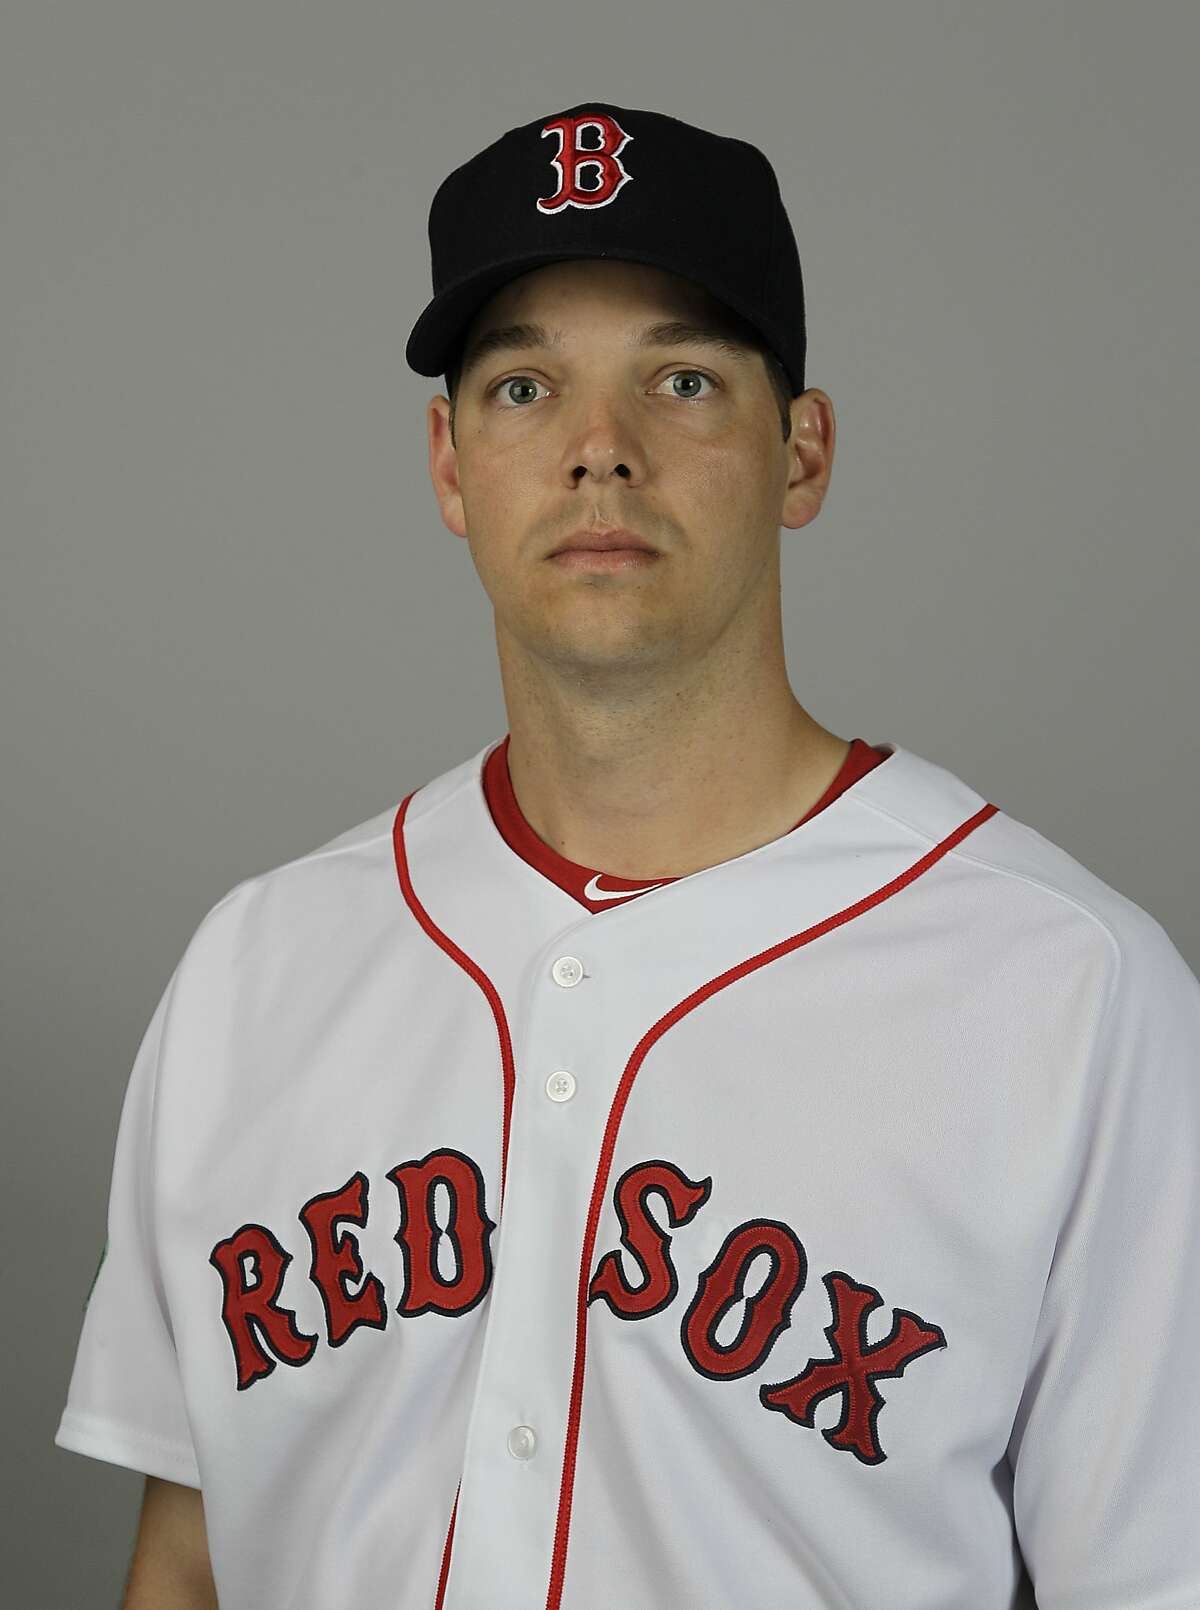 FILE - This is a 2012 file photo showing Boston Red Sox baseball player Rich Hill. Hill starts spring training with a heavy heart. Hill reported to Boston's camp on Thursday, March 6, 2014, following the death of son Brooks, who was less than 2 months old when he died on Feb. 24. (AP Photo/David Goldman/File)